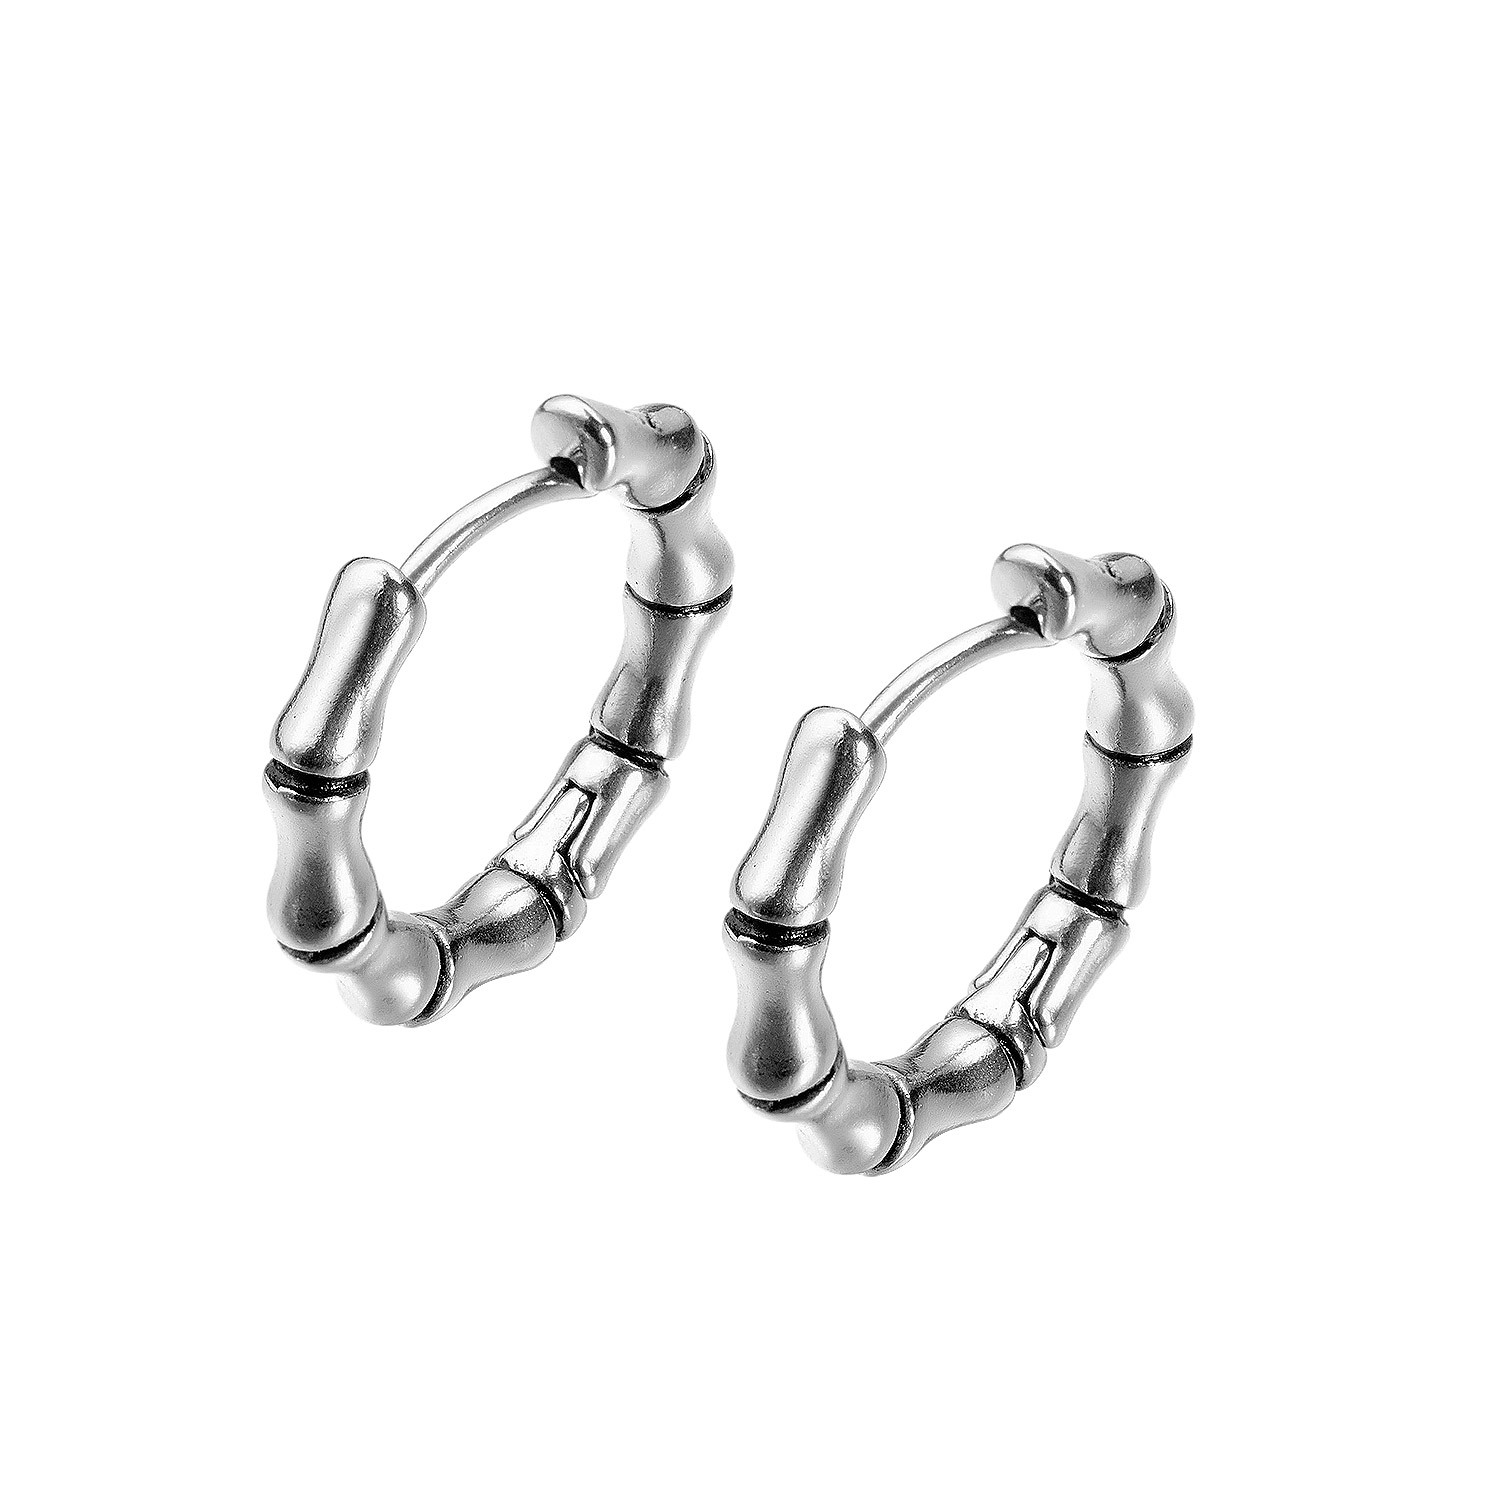 Japan and Han retro trend men's titanium steel earrings personality hip hop simple bamboo holiday fashion female factory direct sales